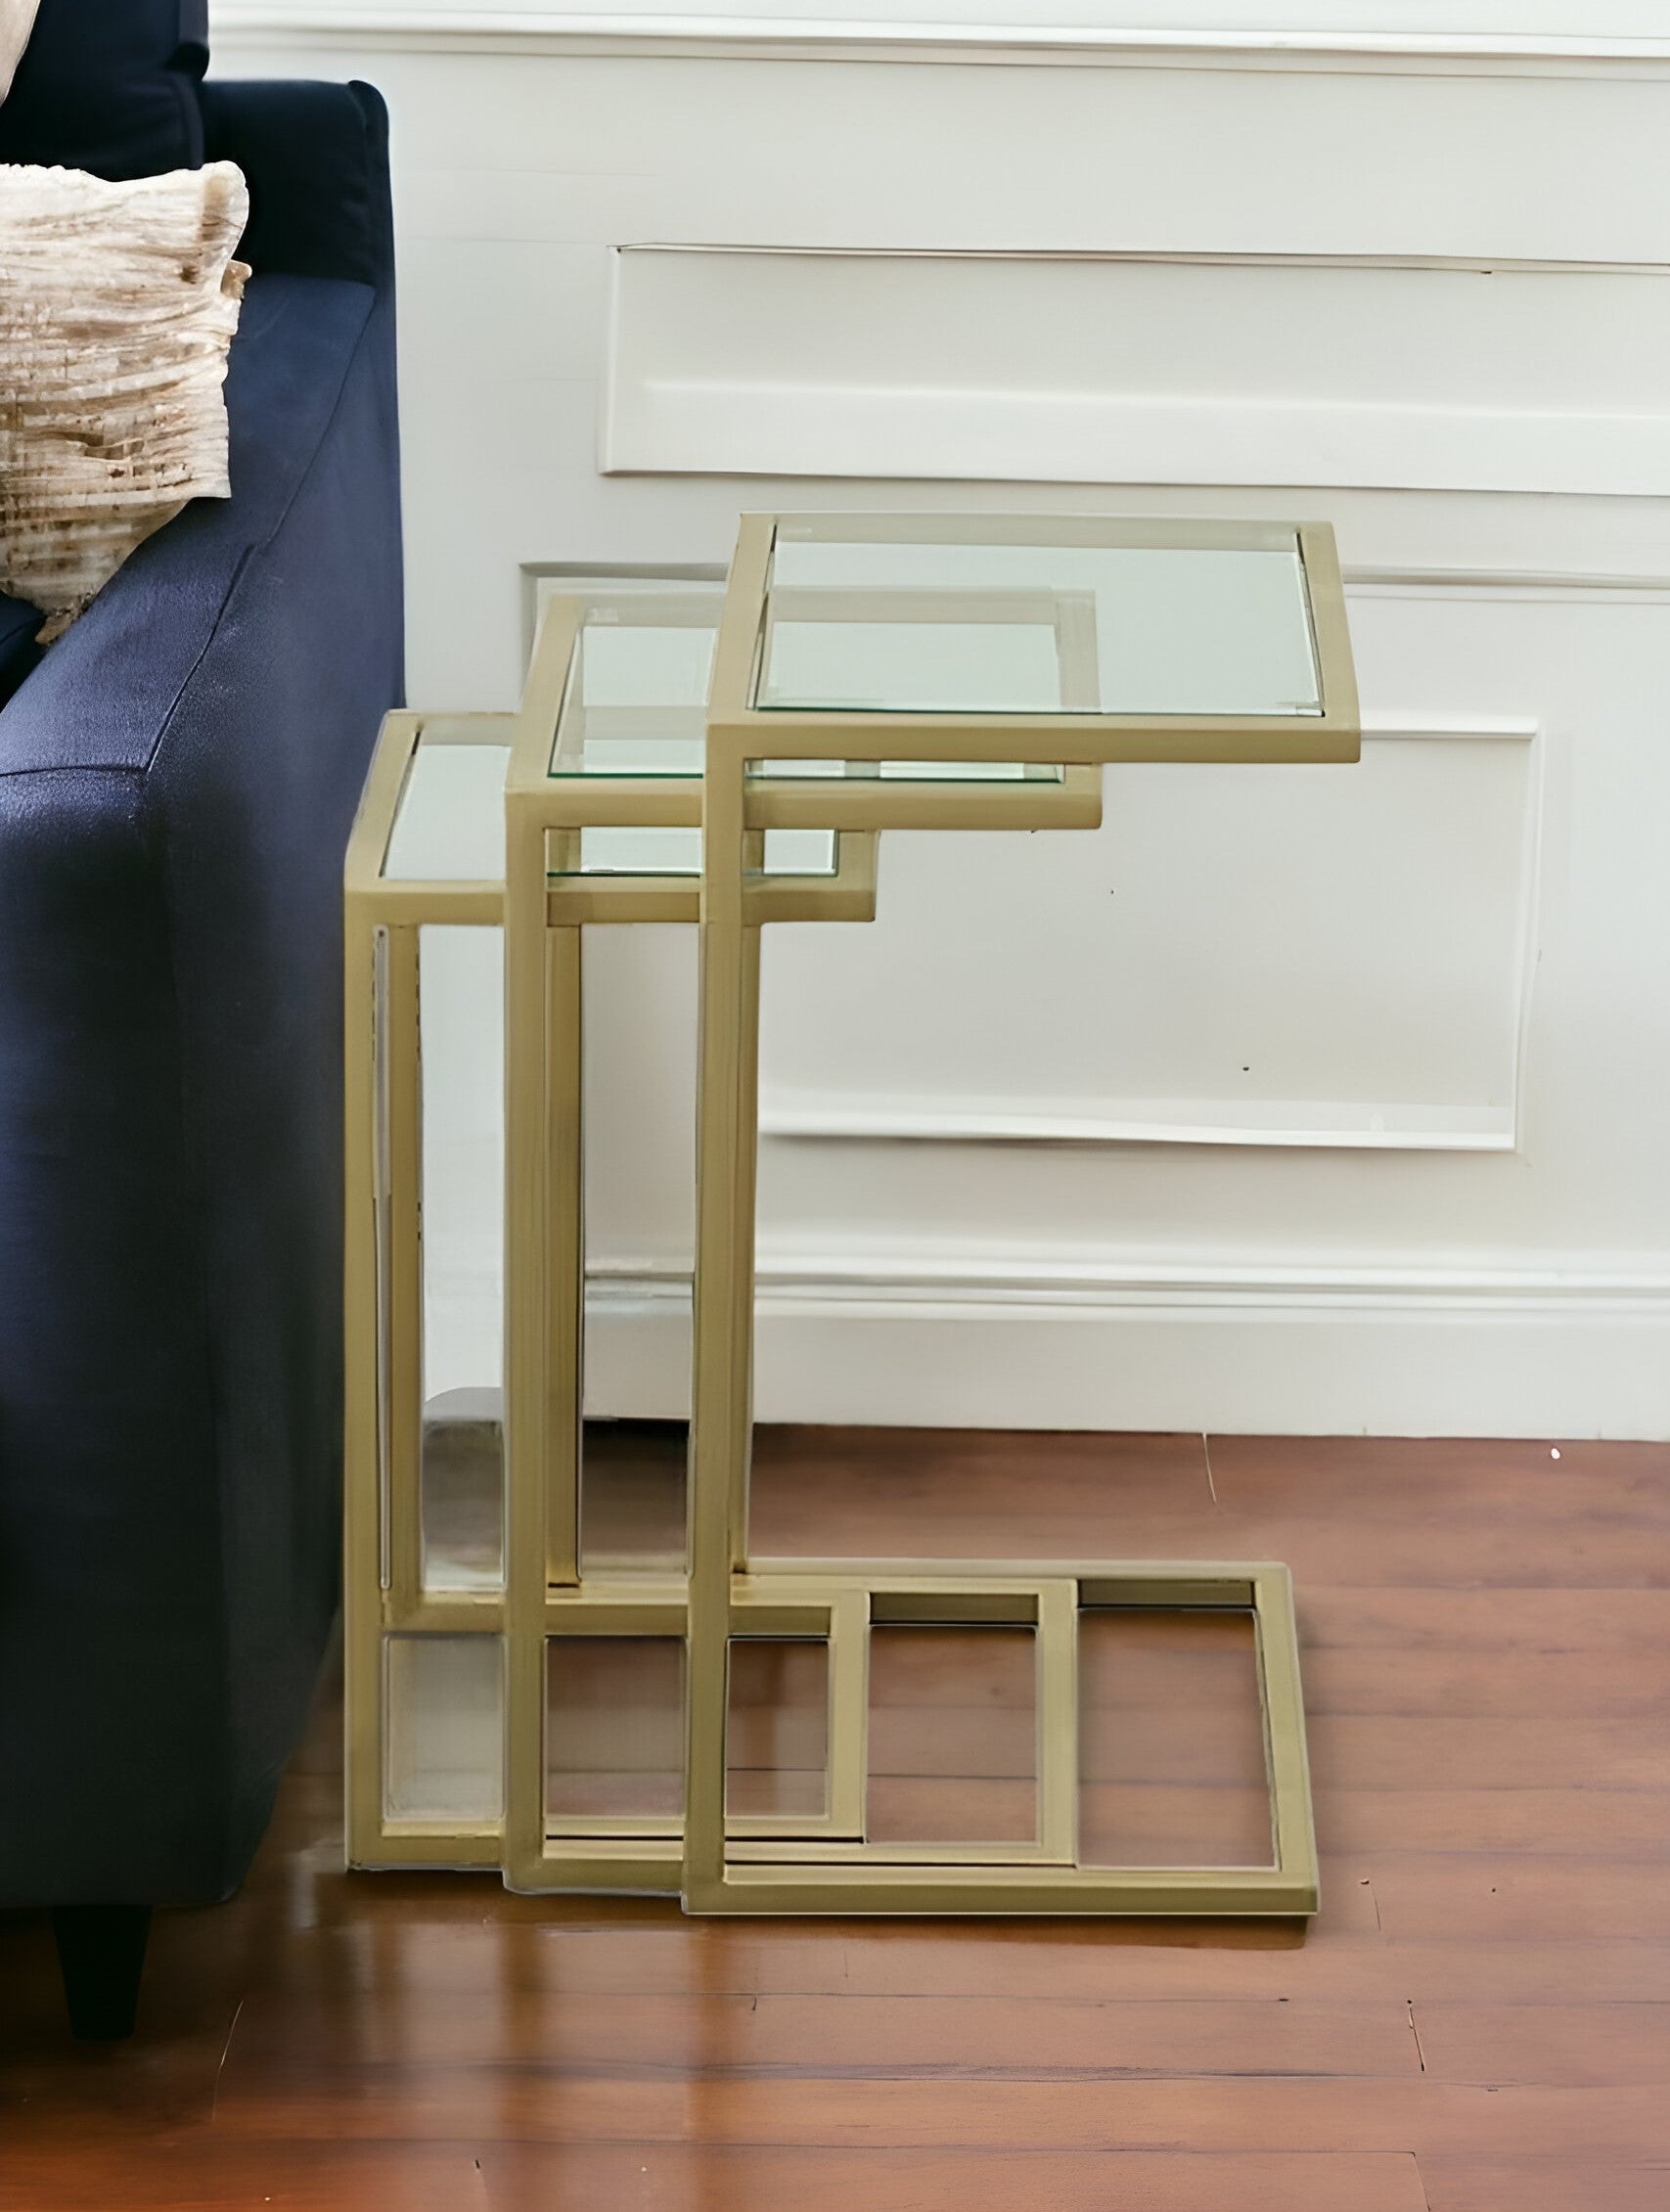 24" Gold Glass Rectangular End Table